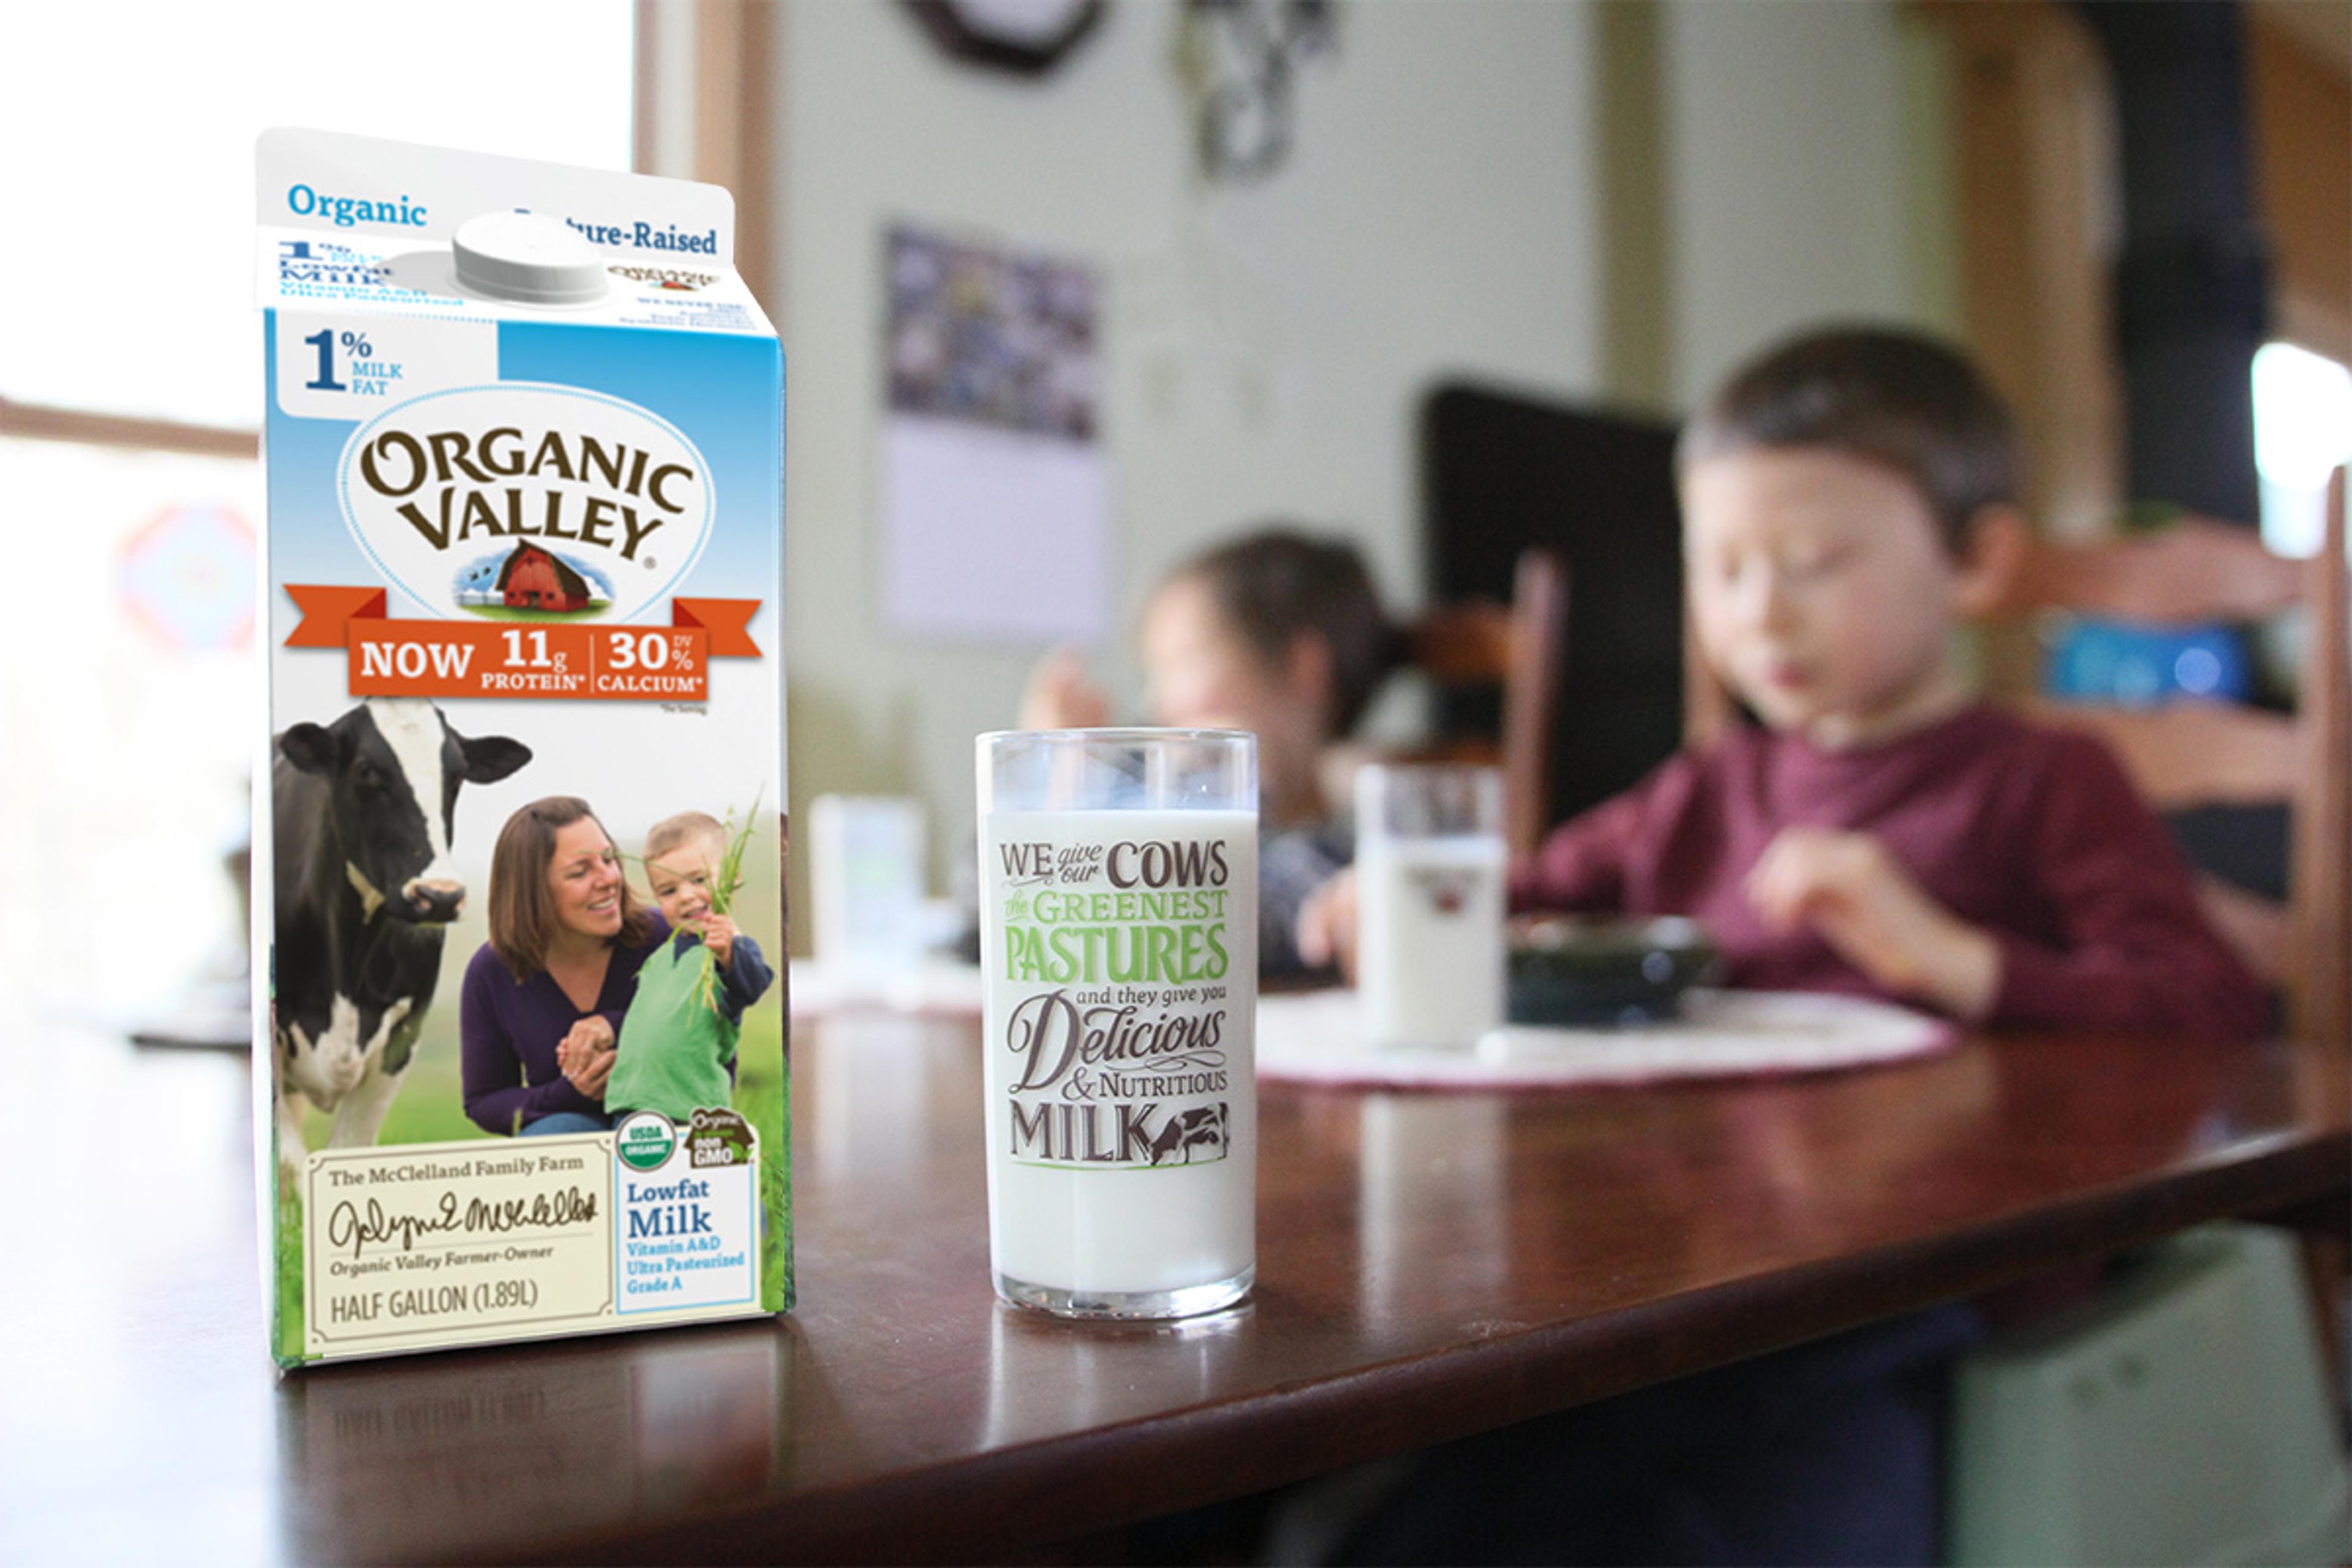 Fortified Organic Valley milk on the kitchen table.